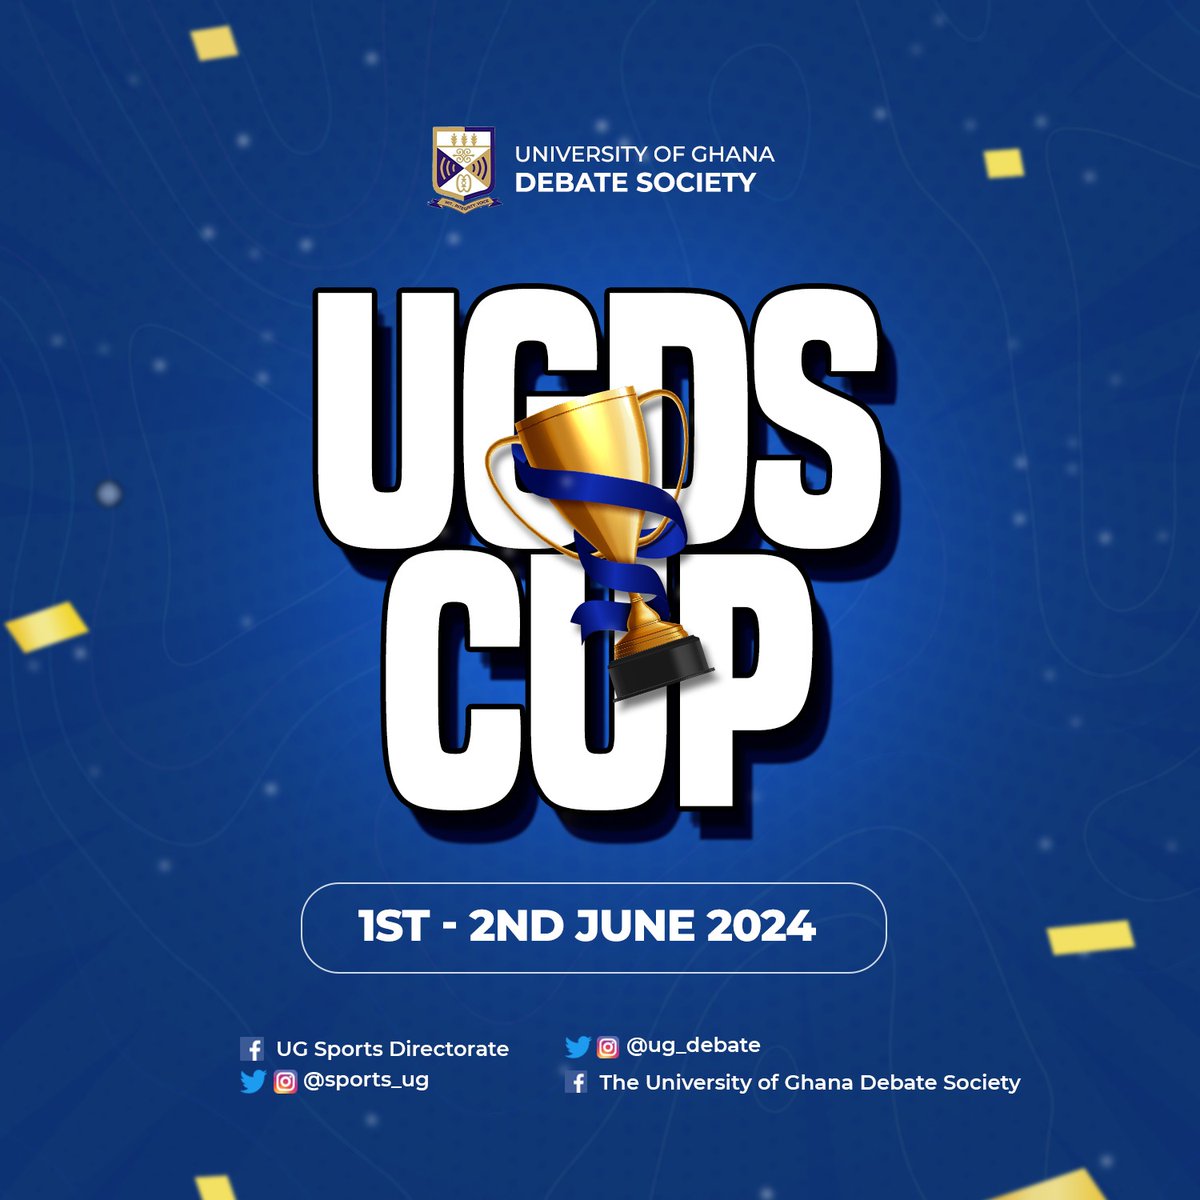 UGDS CUP: The second tournament of the second semester is rolling up! The UGDS Cup is back for the 4th edition of the University of Ghana's only debate tournament for both alumni and continuing students.  See you on June 1st and 2nd🤝! . . . #UGDebate #UGSports